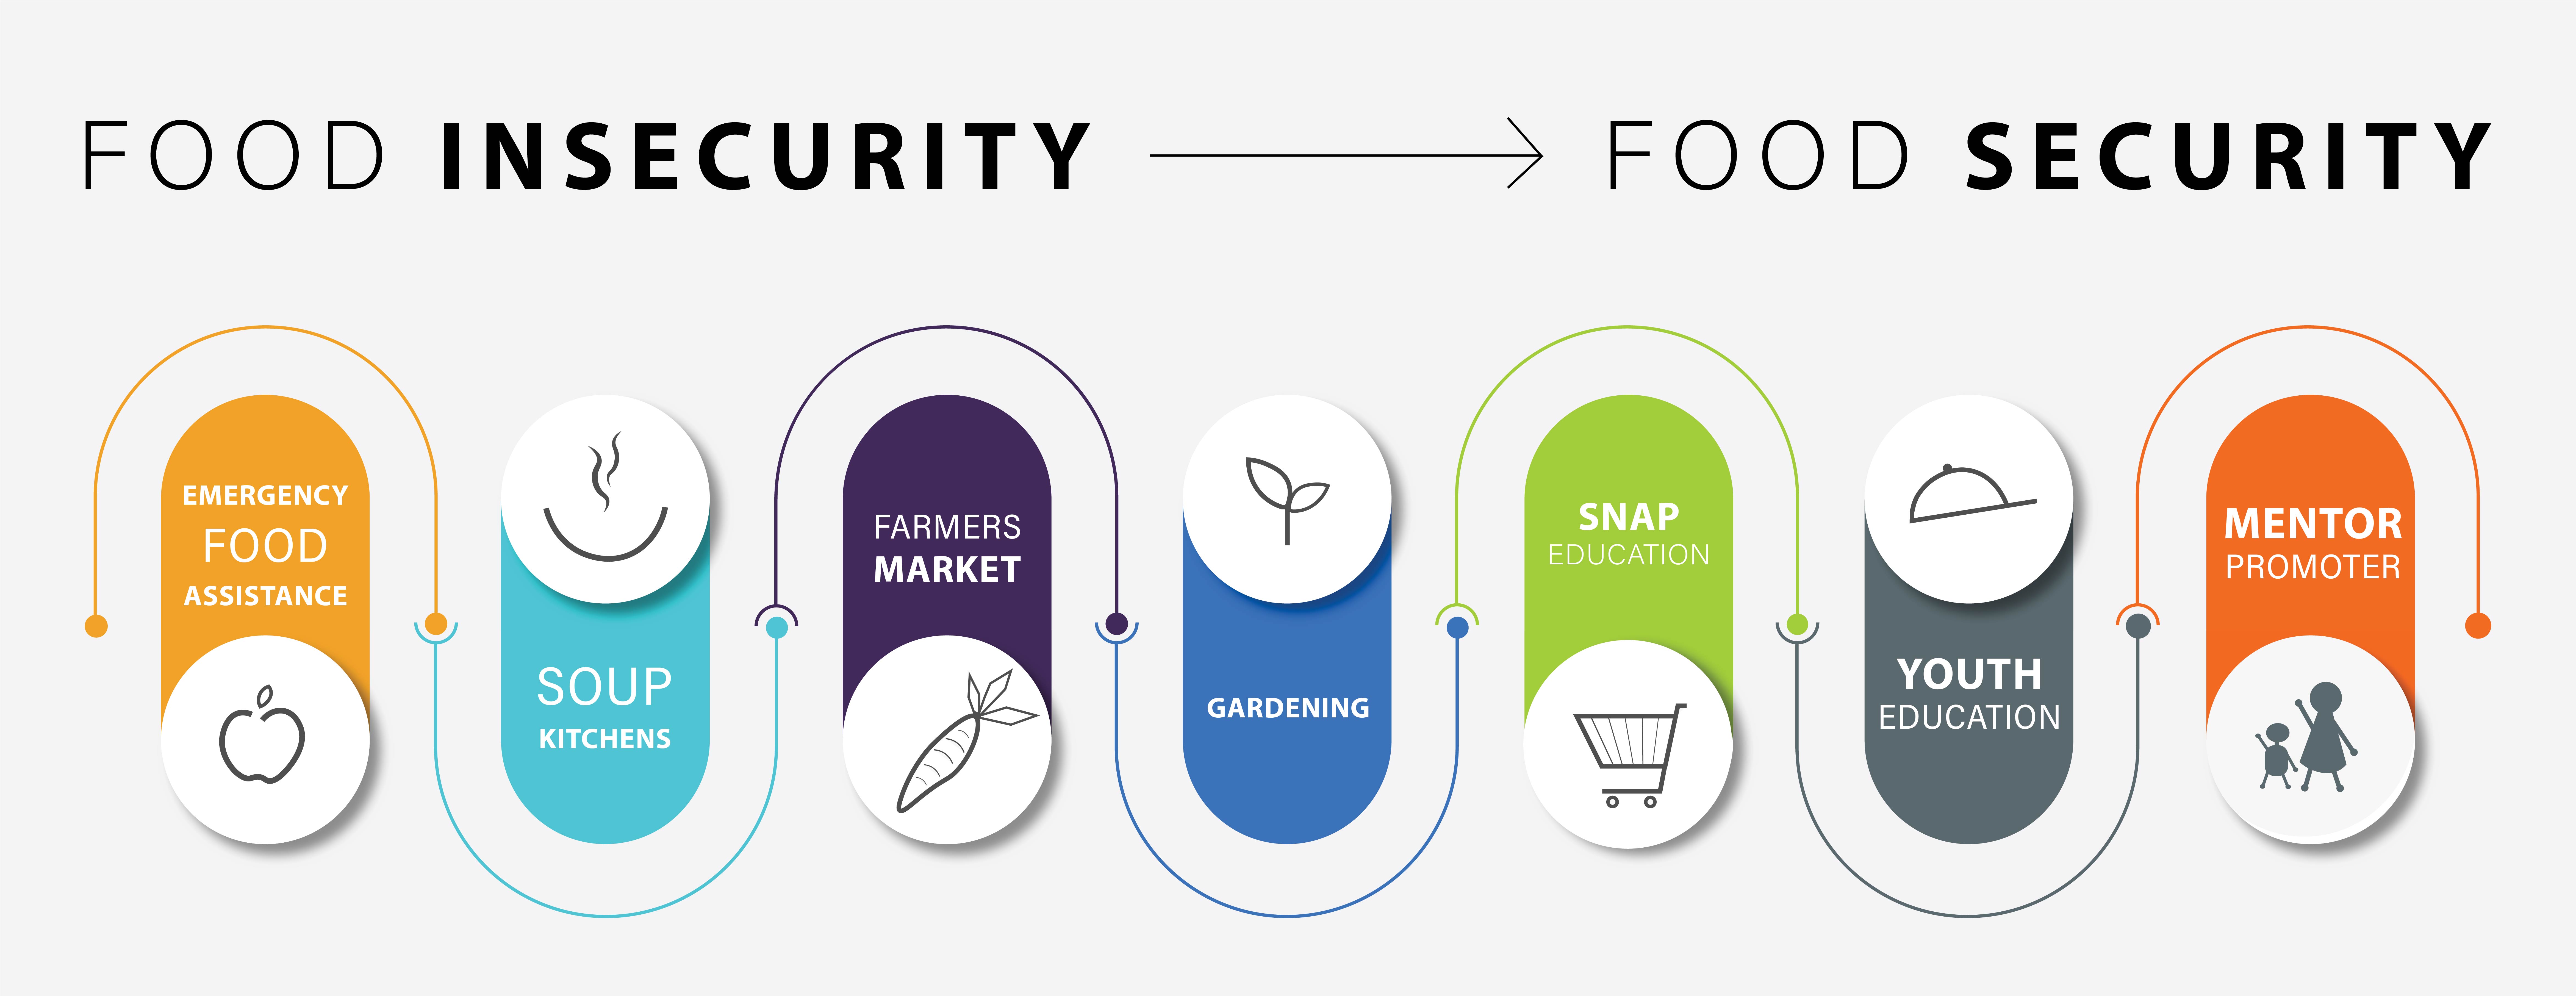 Food Insecurity to Food Security Graphic